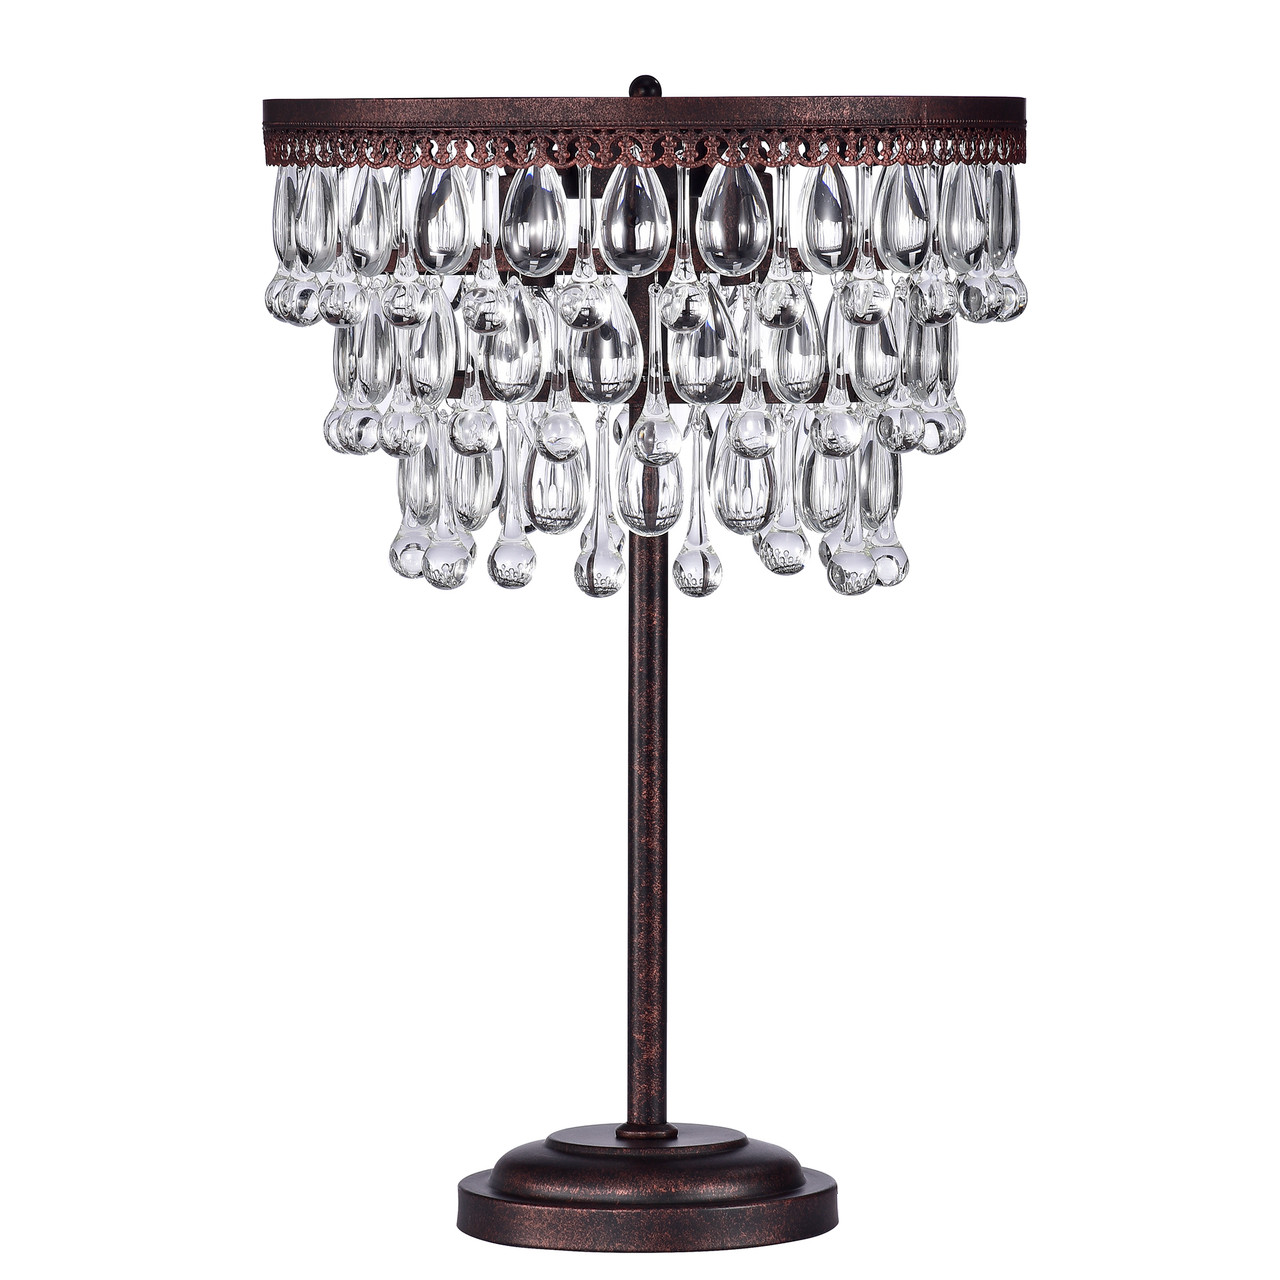 WAREHOUSE OF TIFFANY'S IMT30B/3AC Mageau Antique Copper 3-light Table Lamp with Crystals